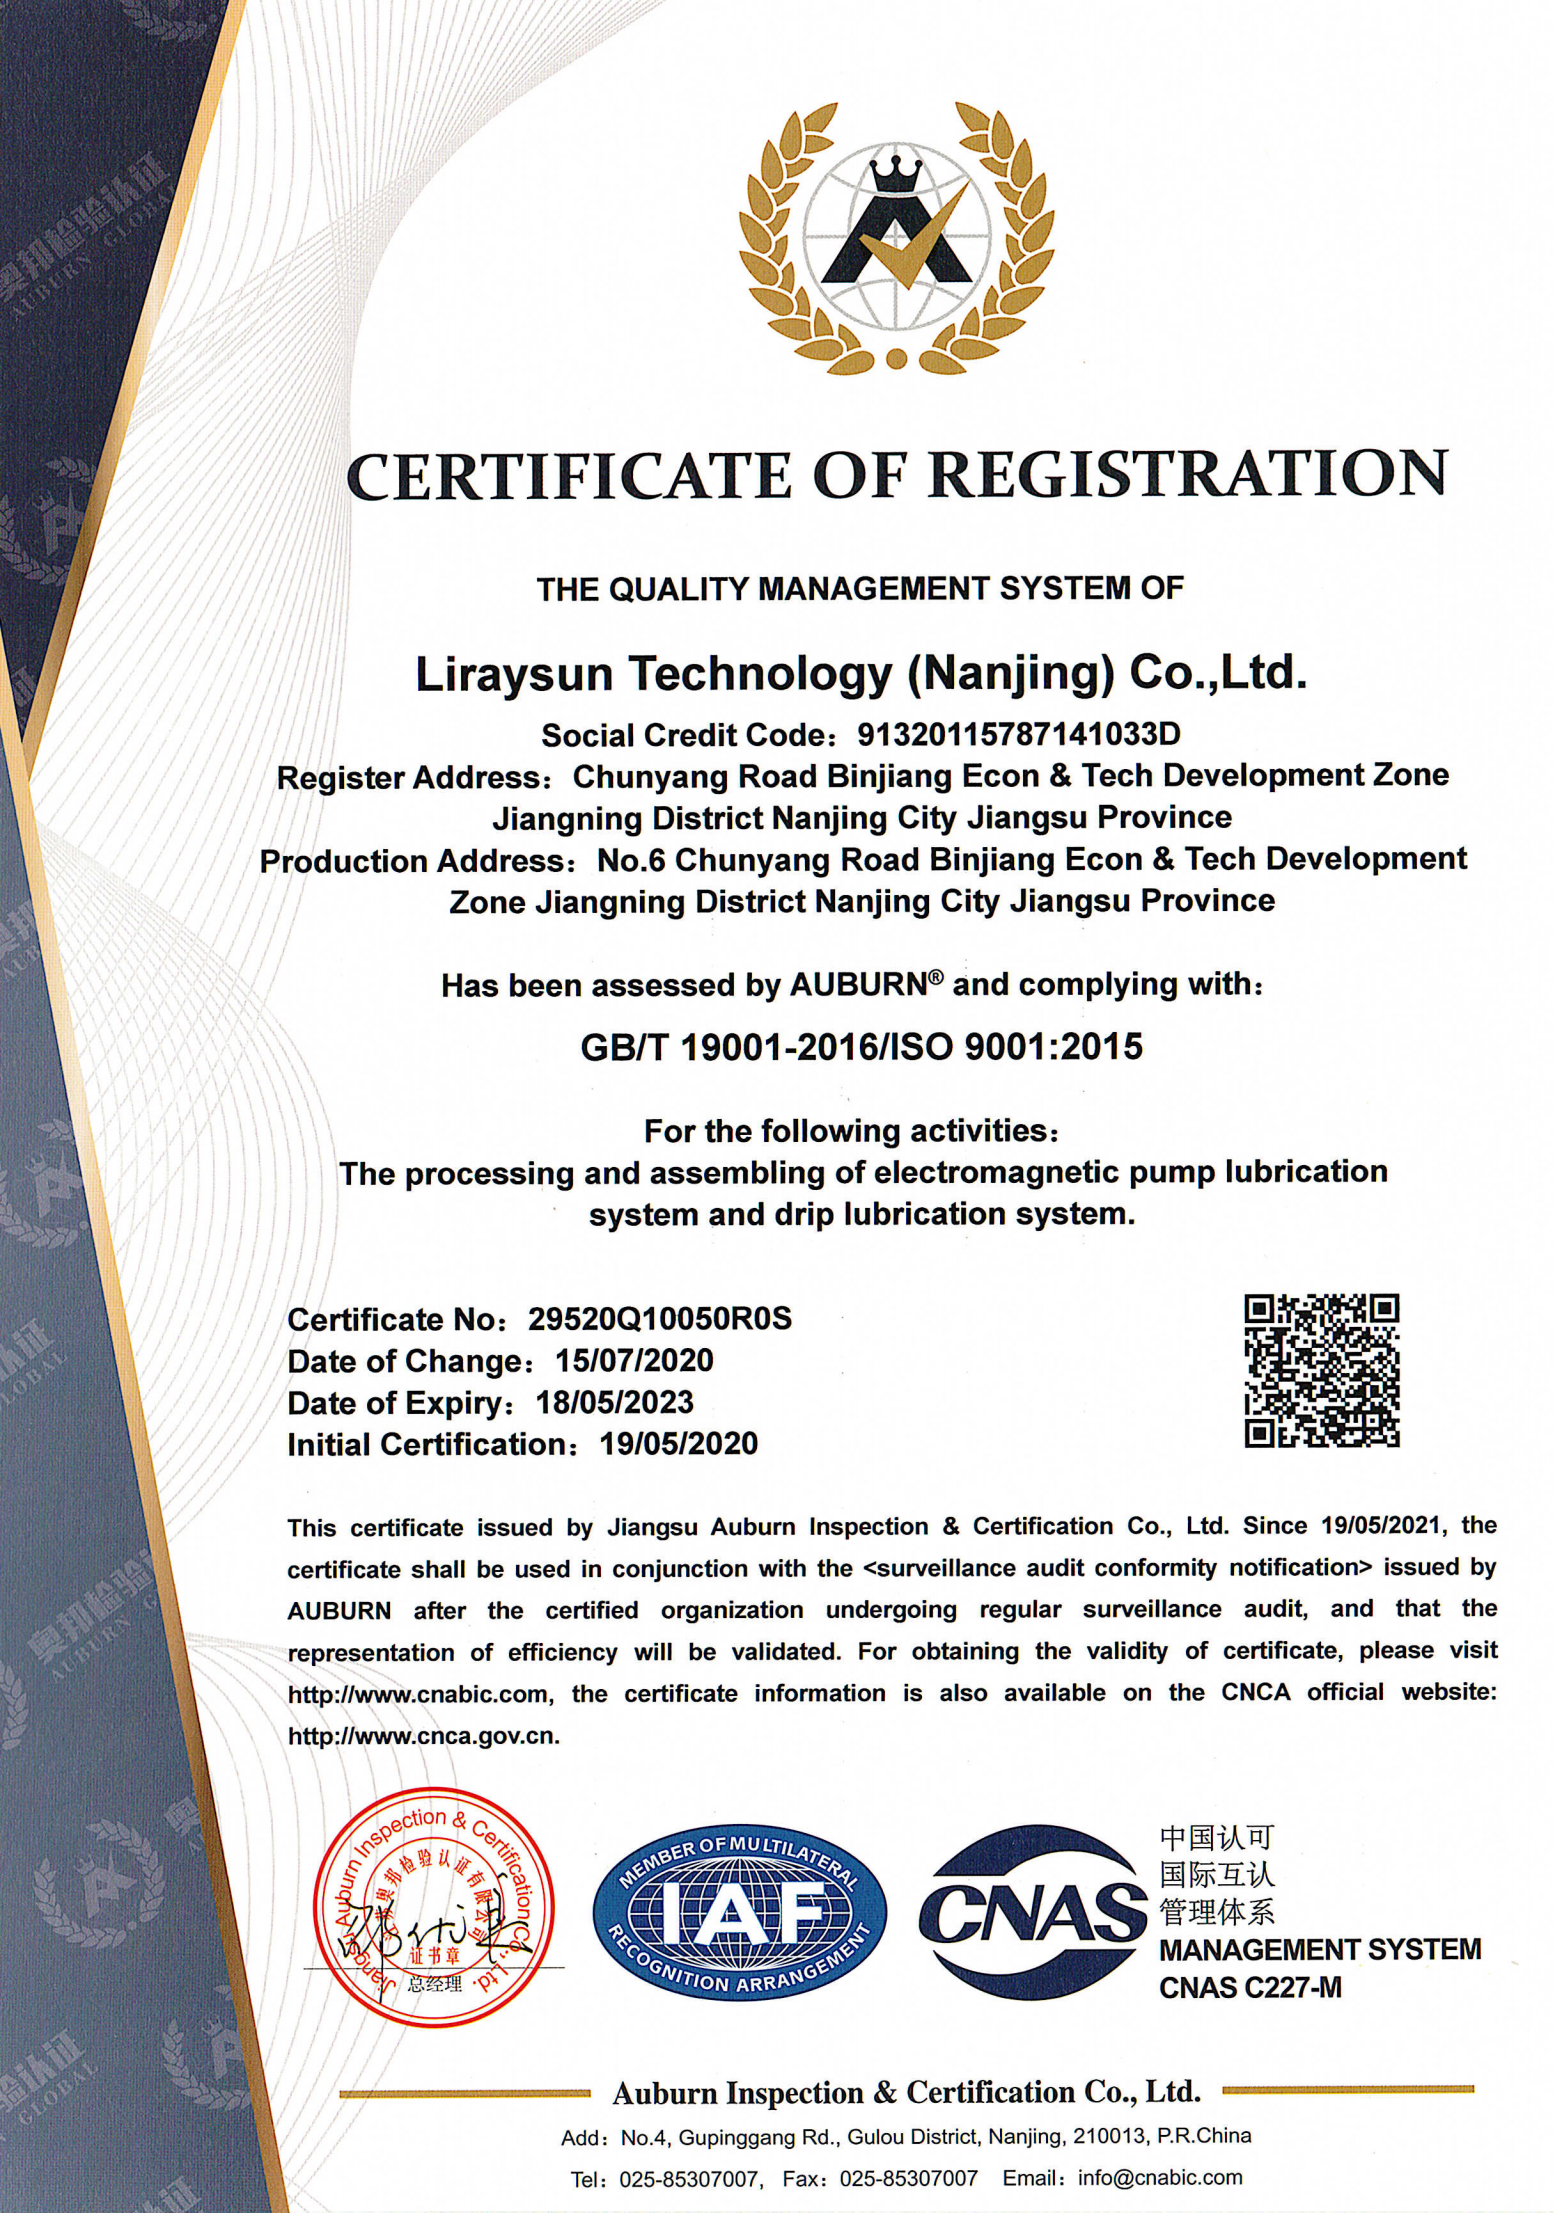 Management system ISO9001:2015 certificate